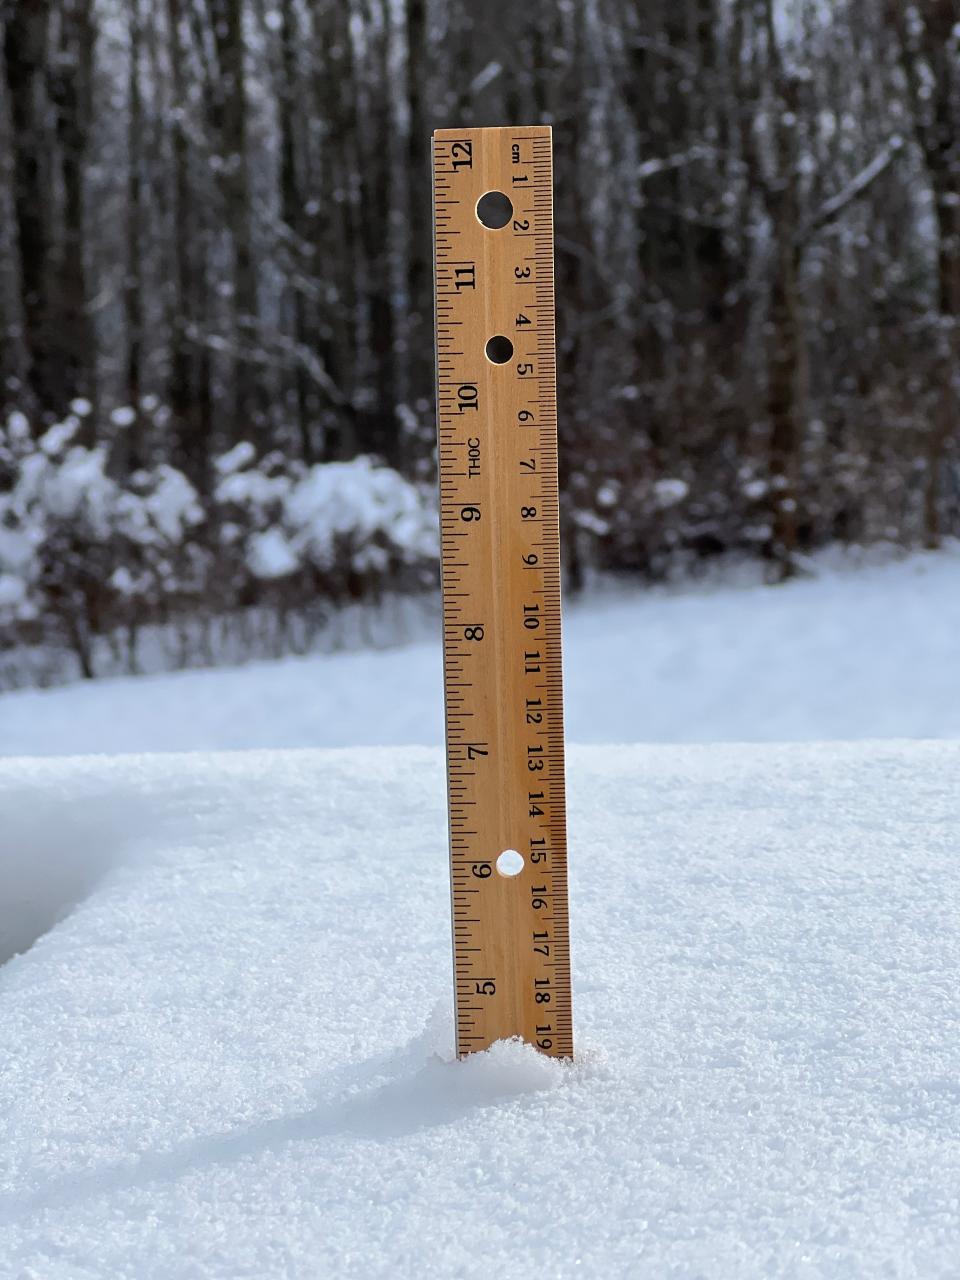 A ruler shows snow at about 4-and-a-half inches deep on Dec. 12, 2023 in Williston following a snowstorm that ended the previous evening.